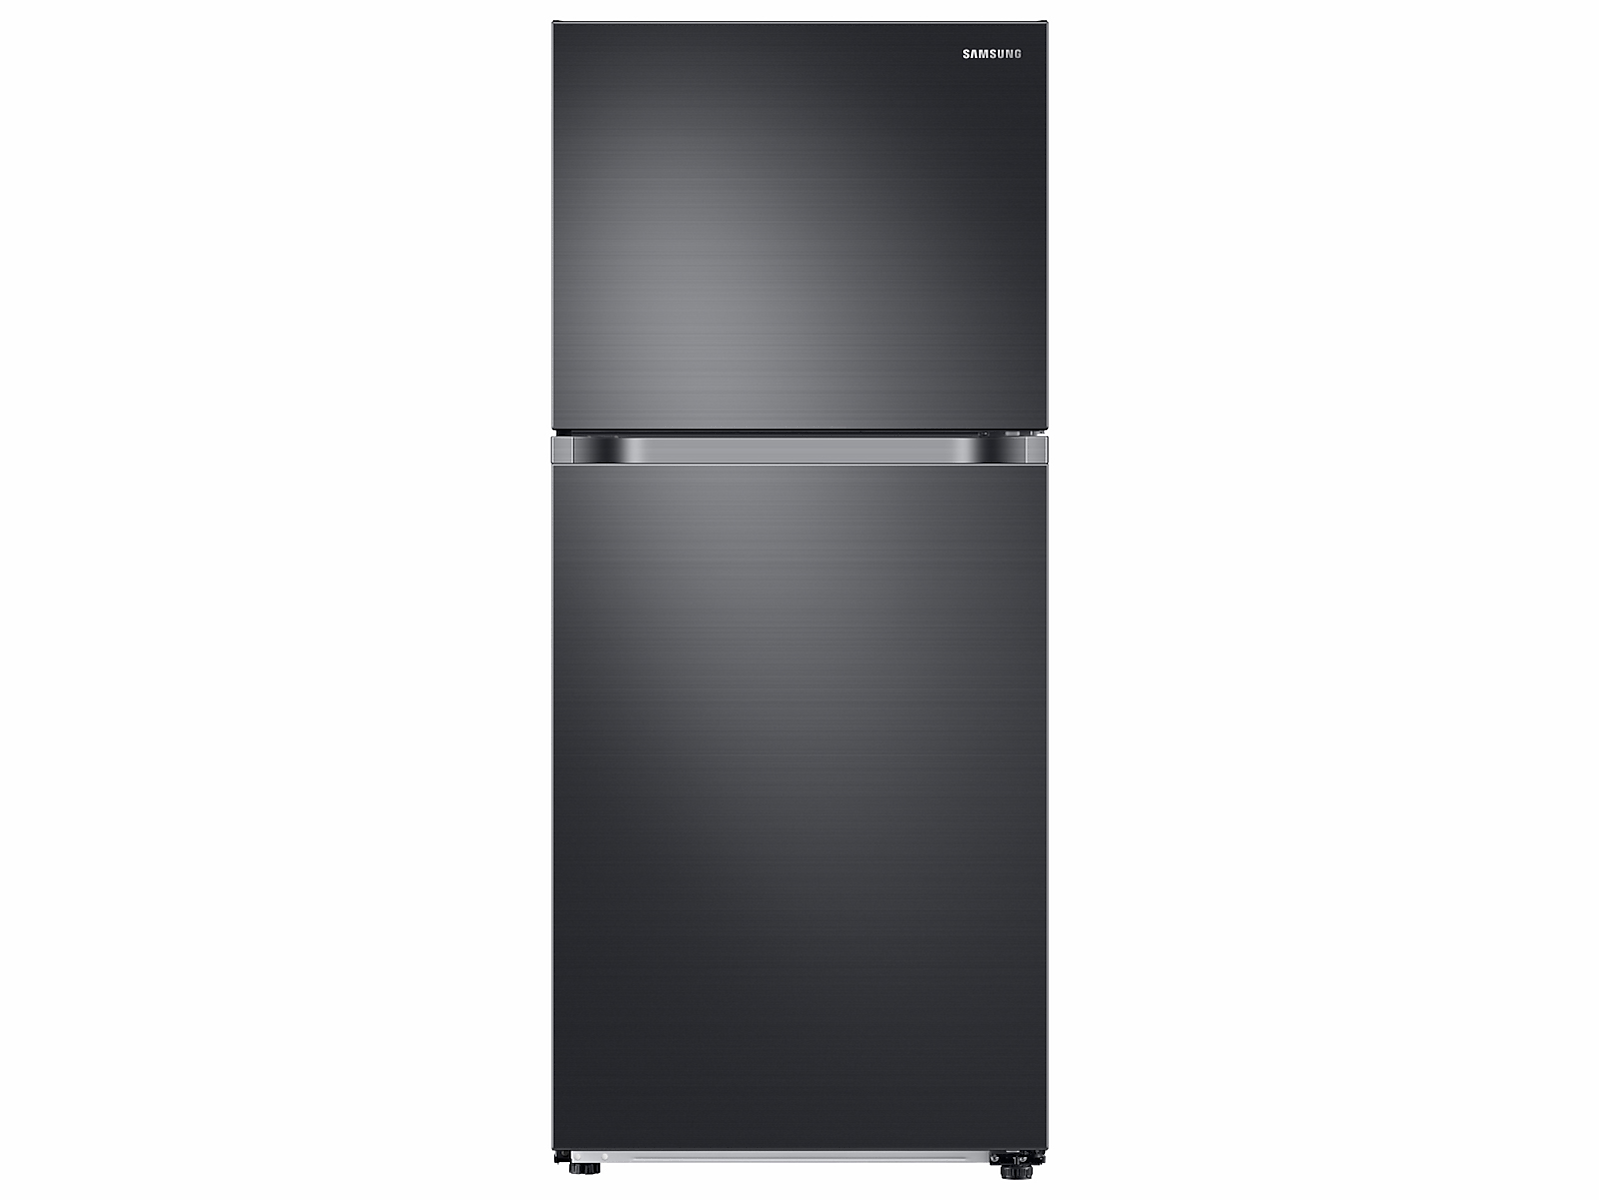 Samsung 18 cu. ft. Top Freezer Refrigerator with FlexZone™ and Ice Maker in Black Stainless Steel(RT18M6215SG/AA) photo